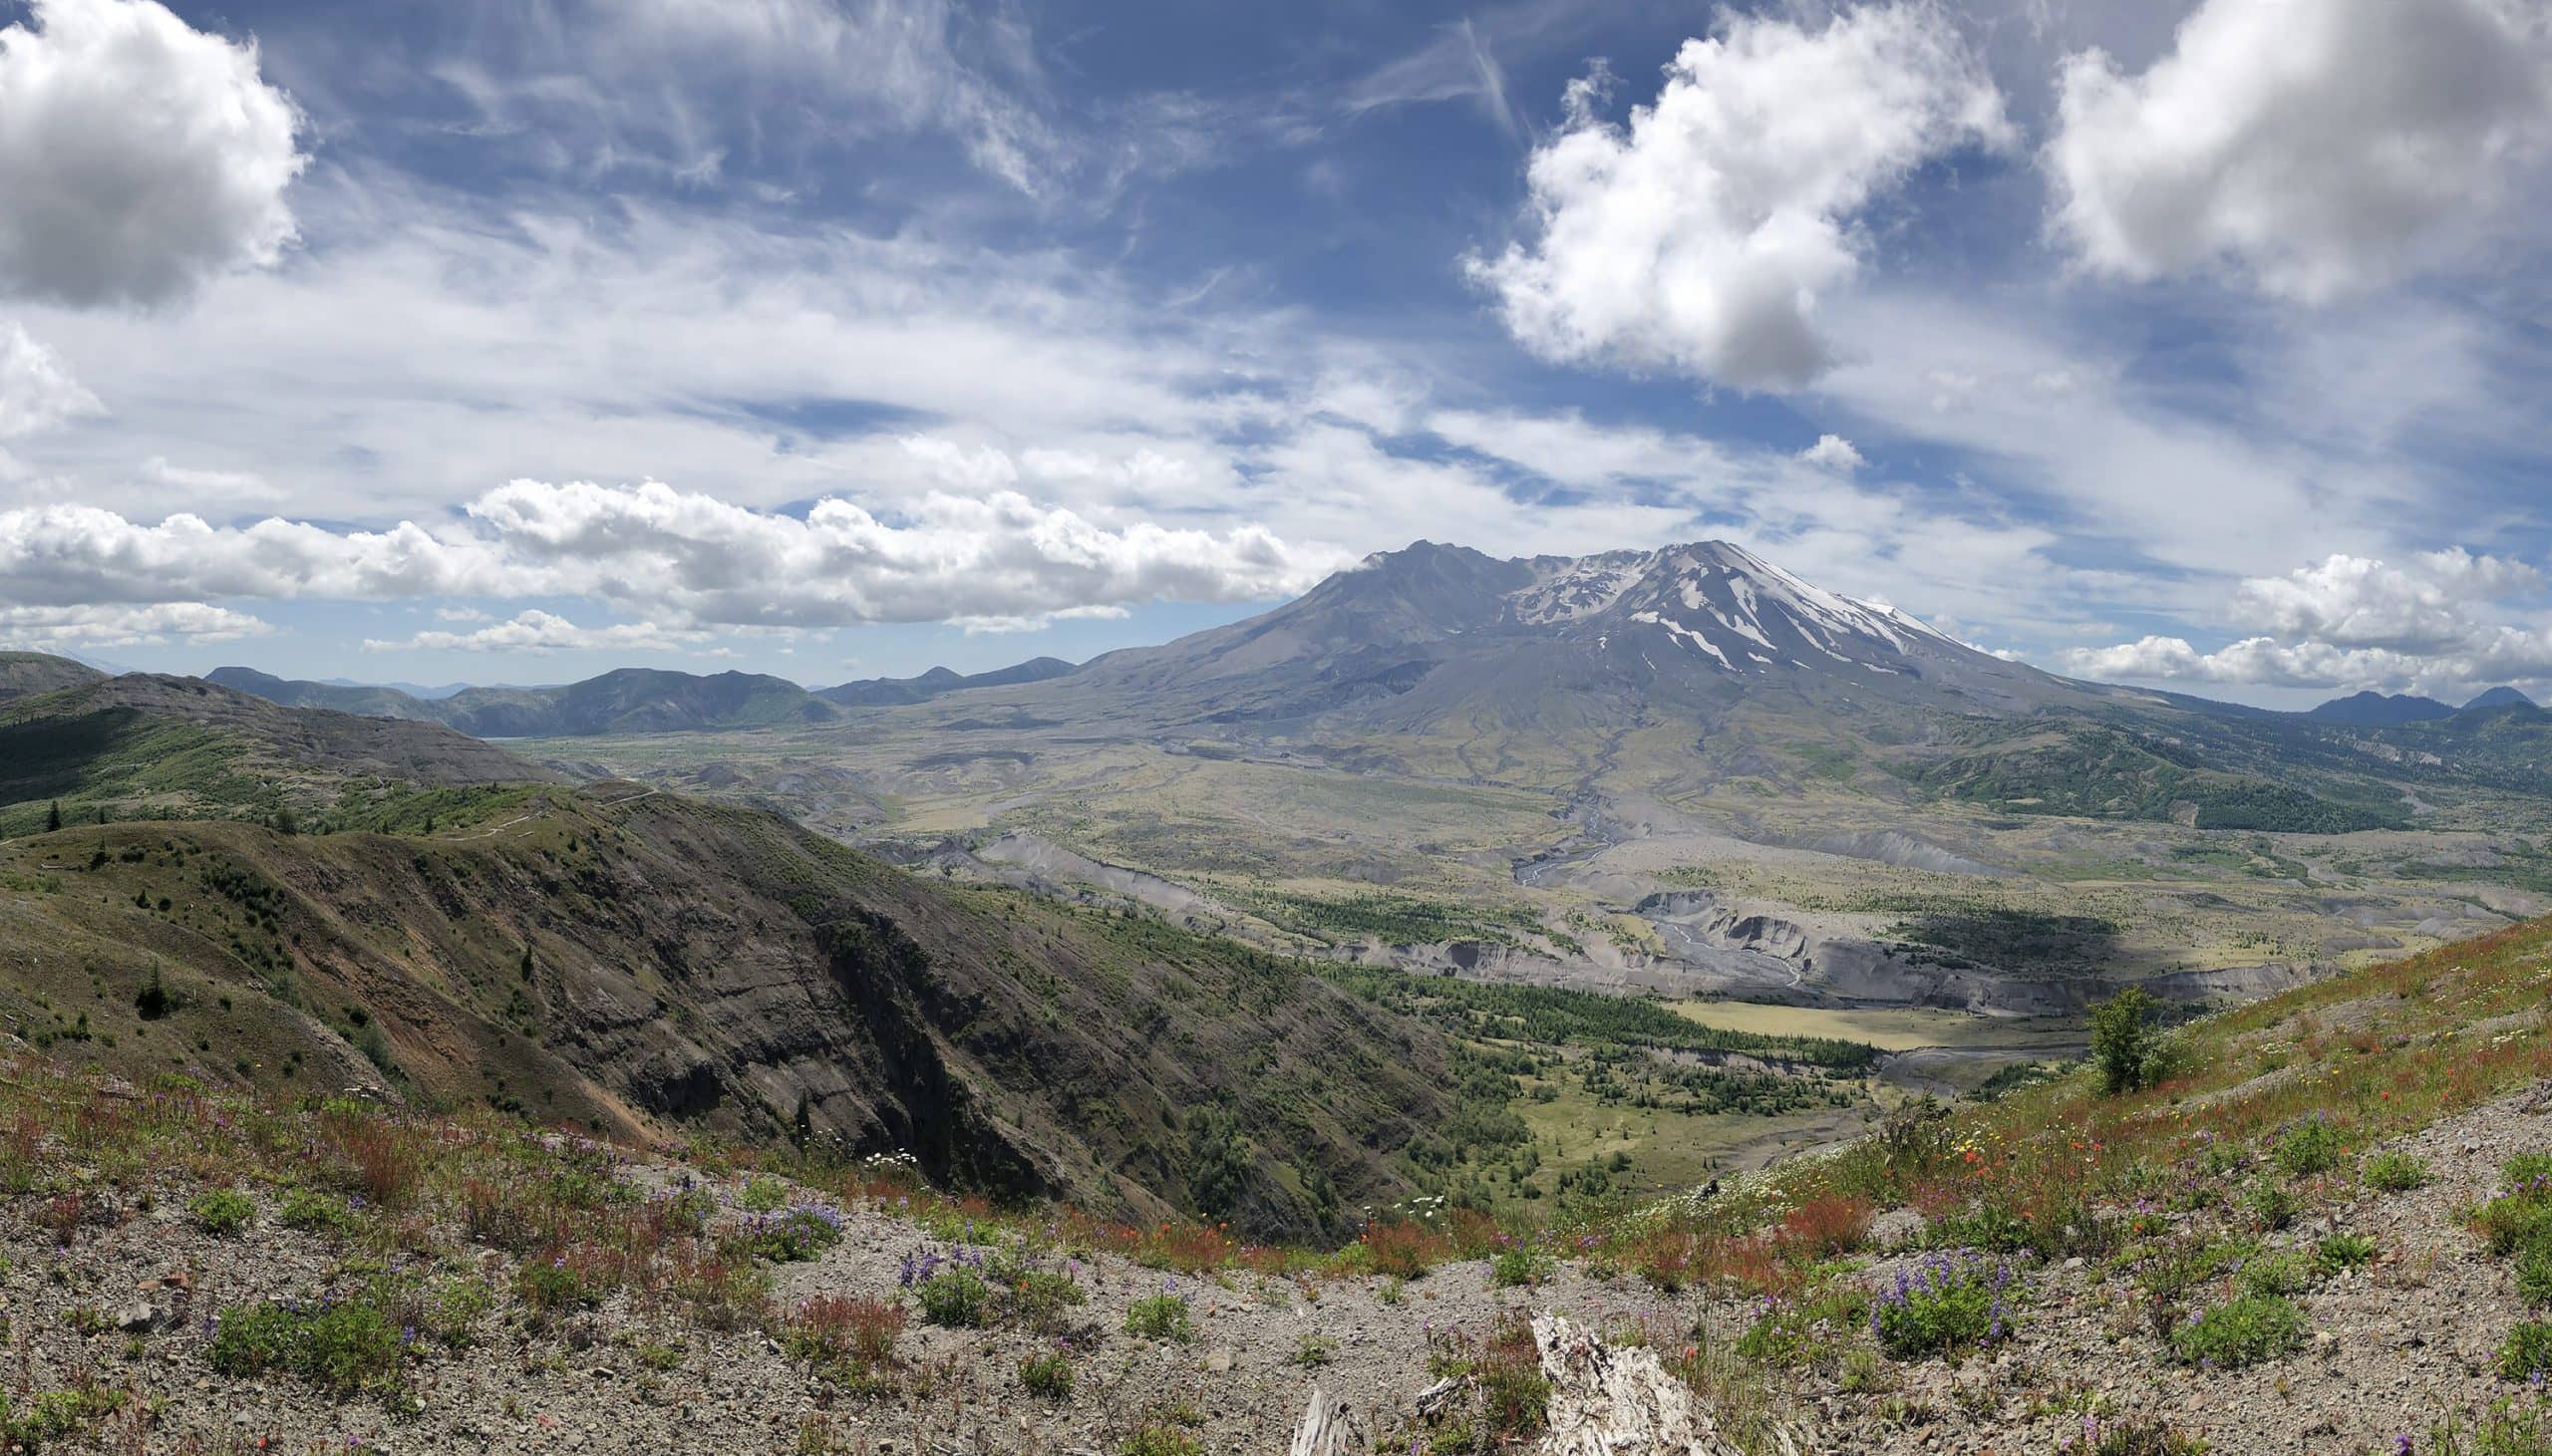 Beautiful view of Mount Saint Helens during a day trip